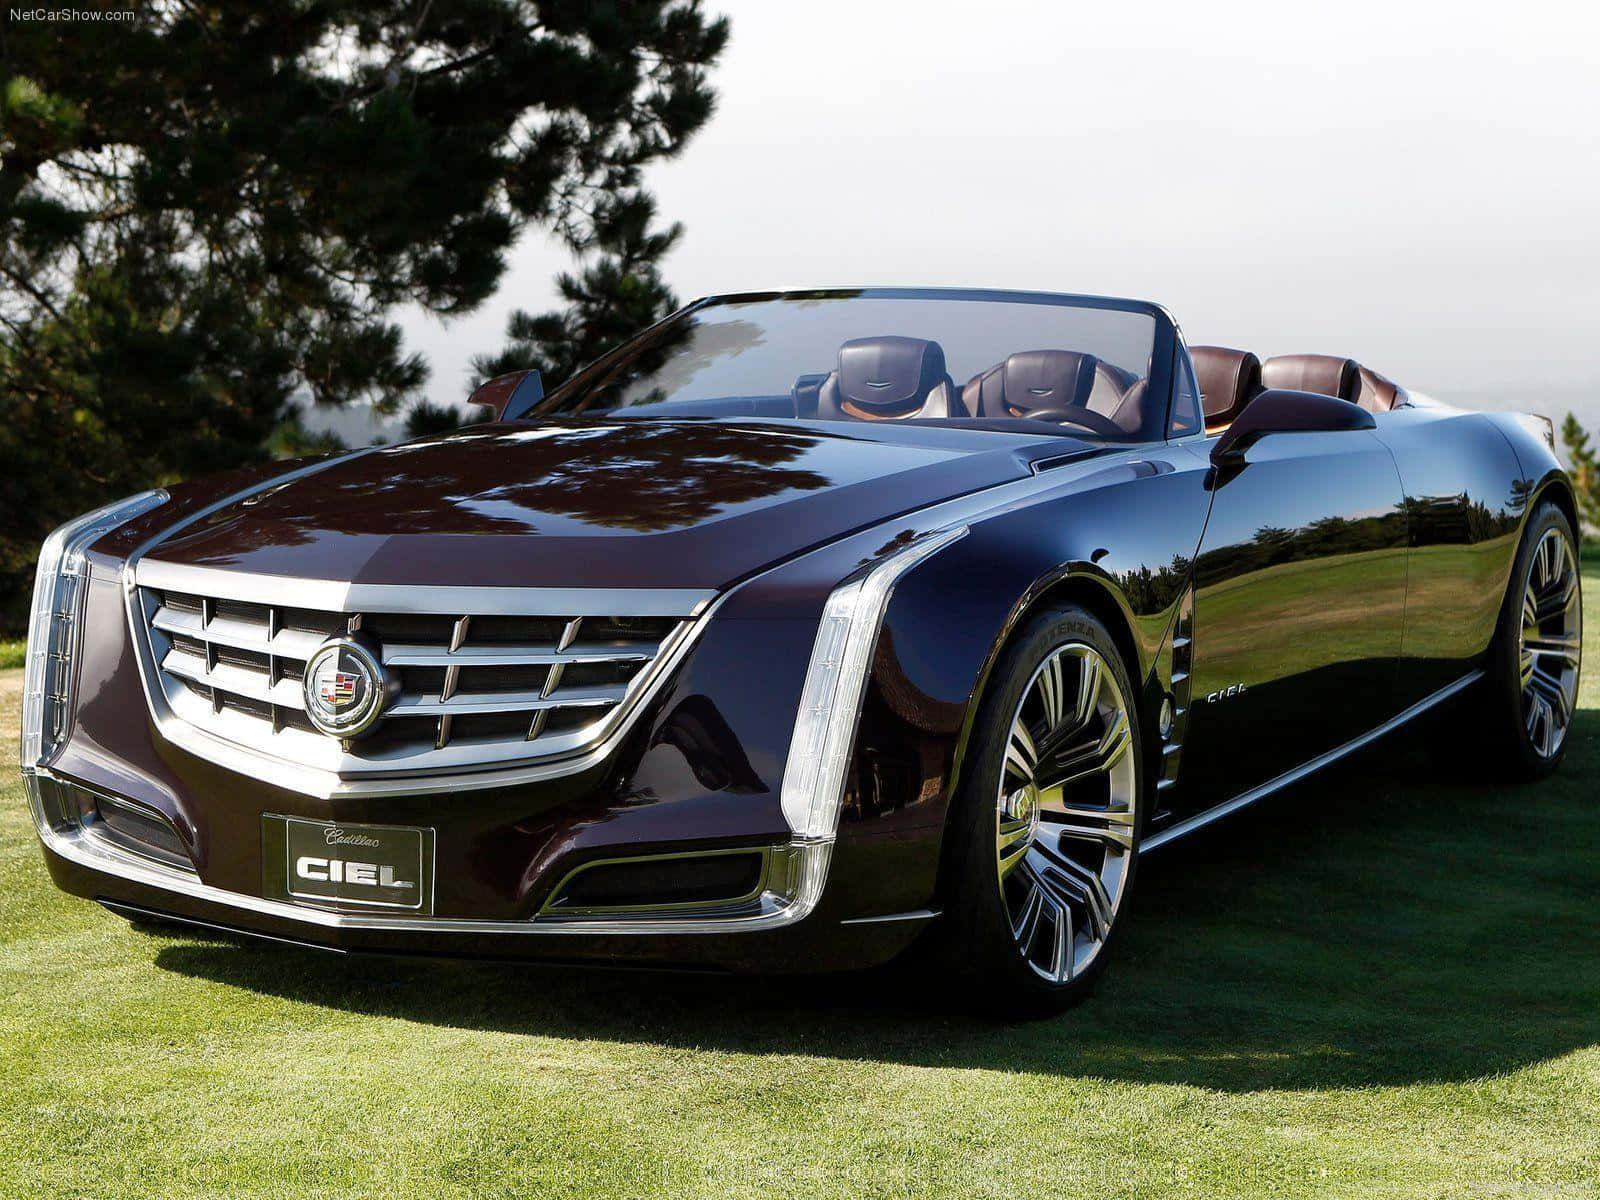 Feel the luxury of driving a Cadillac